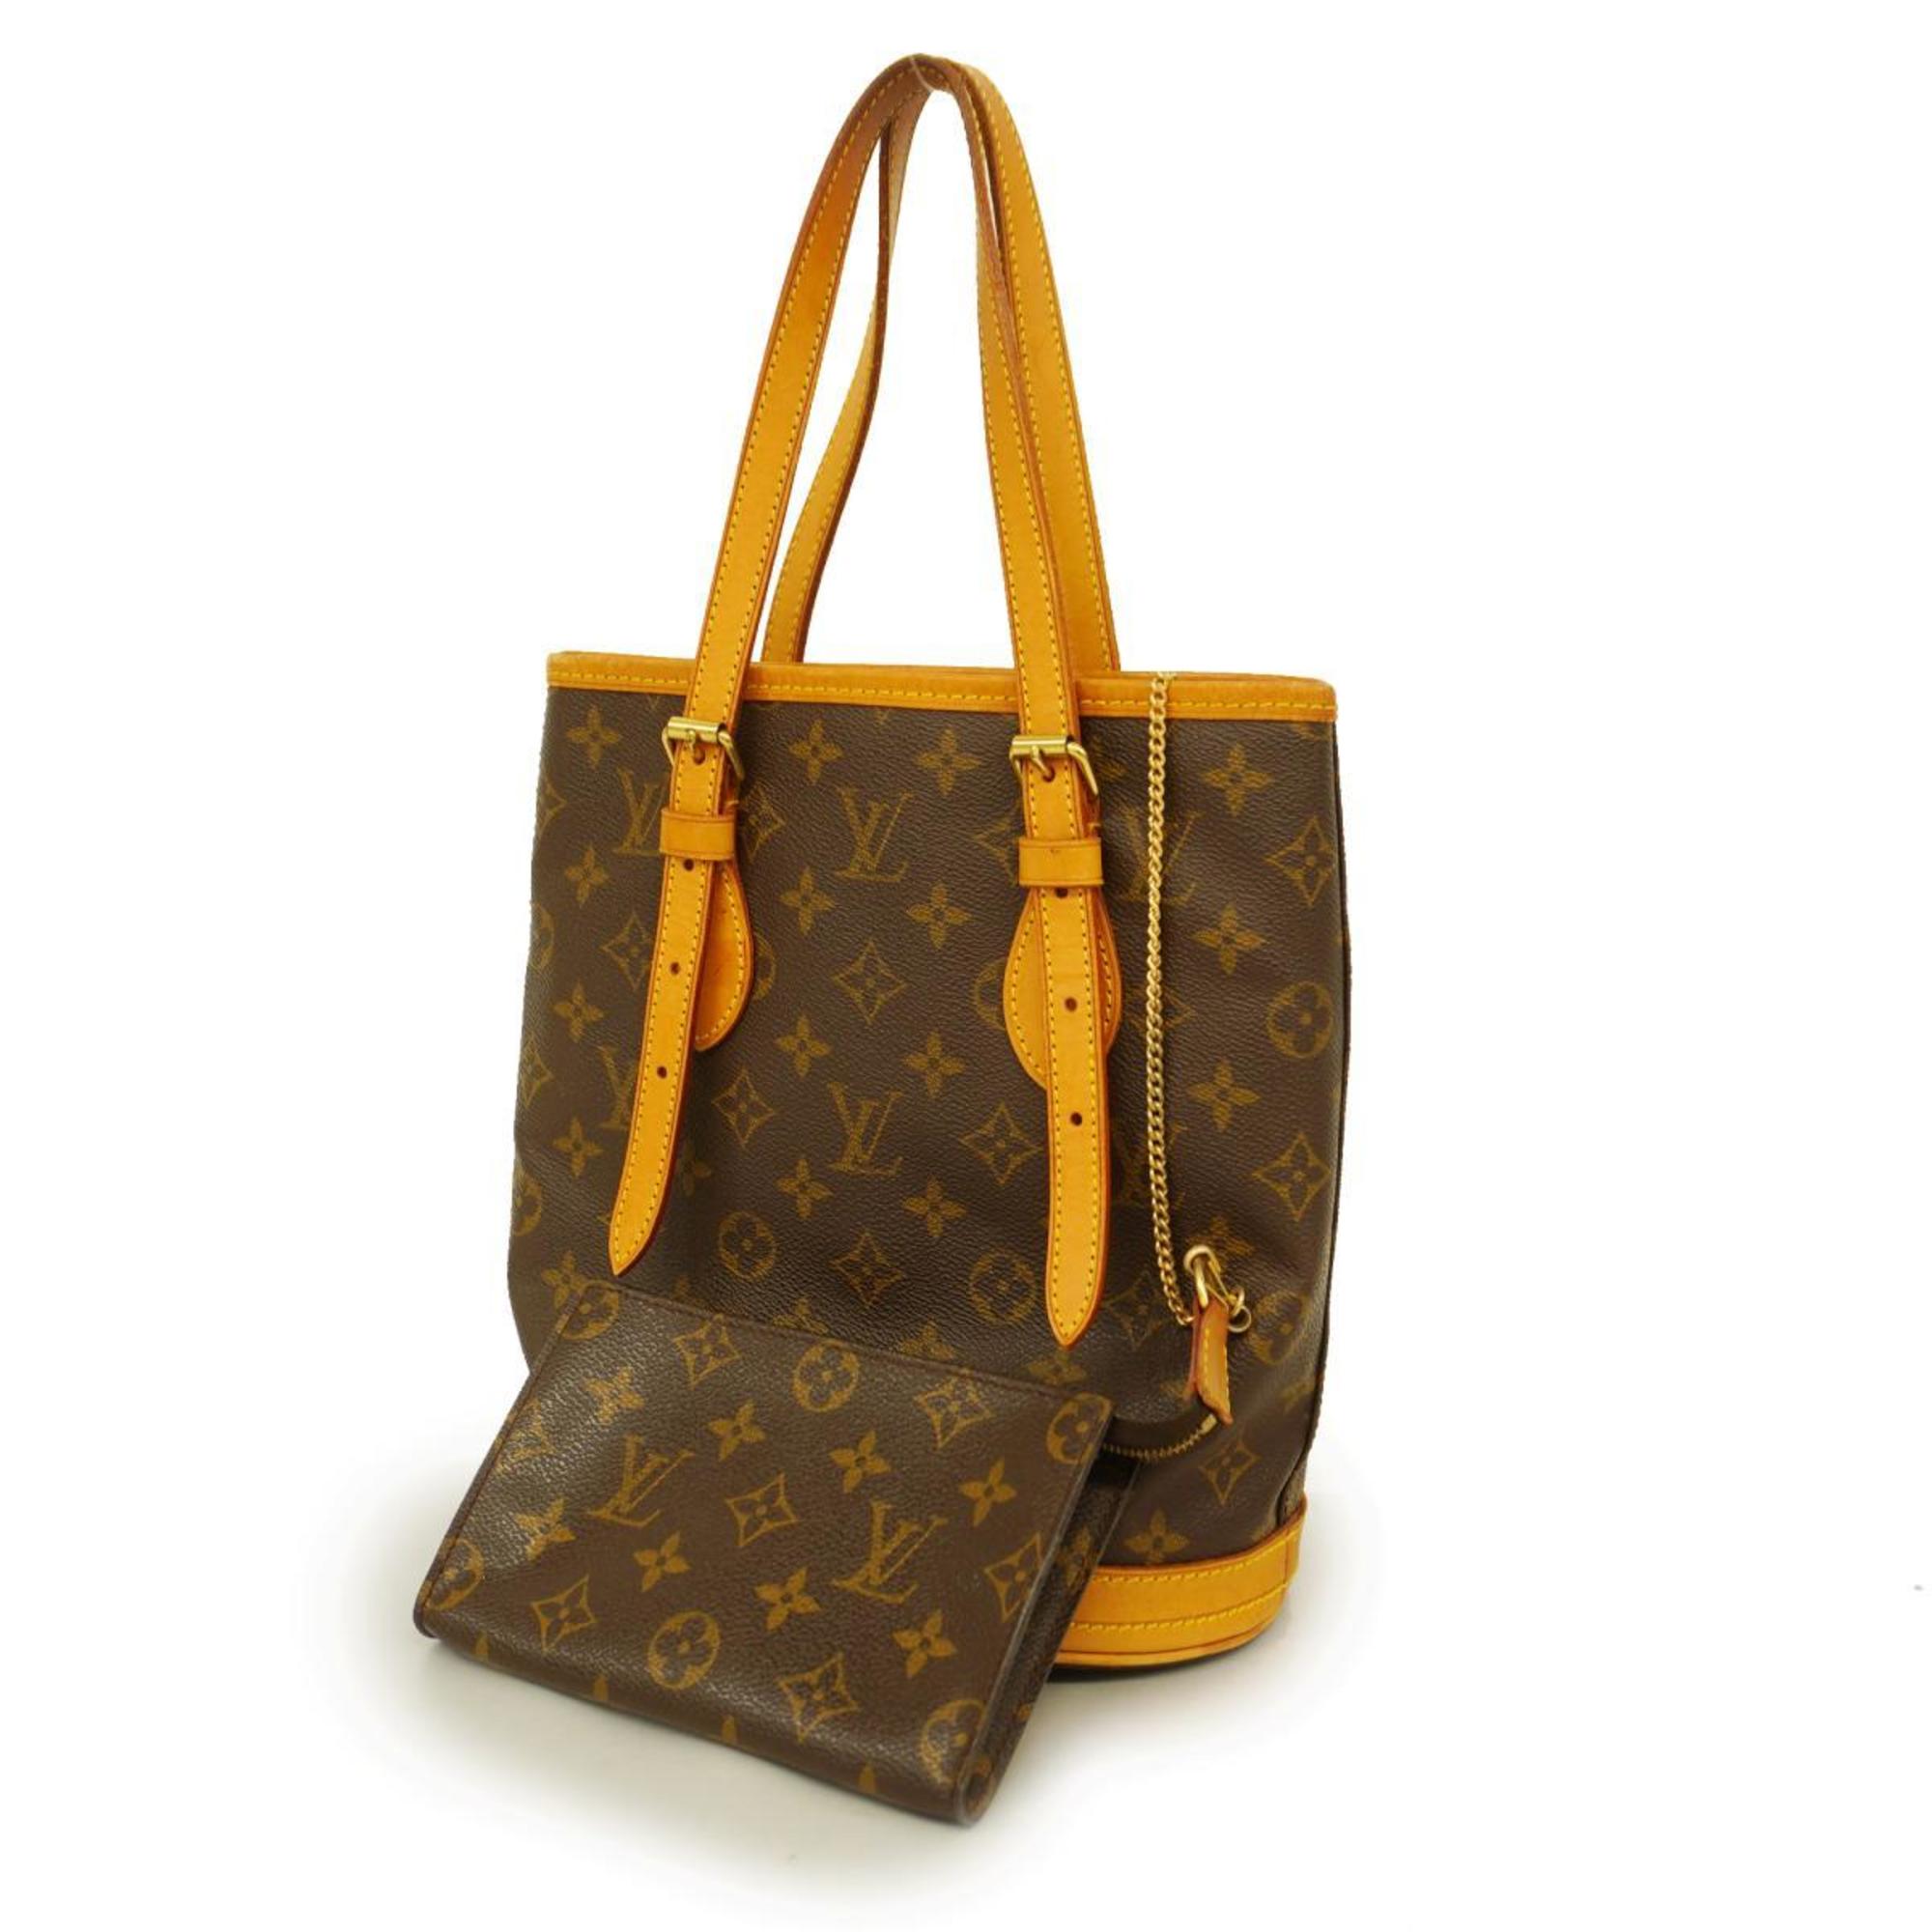 ◇◇LOUIS VUITTON ルイヴィトン プチバケット モノグラム バッグ